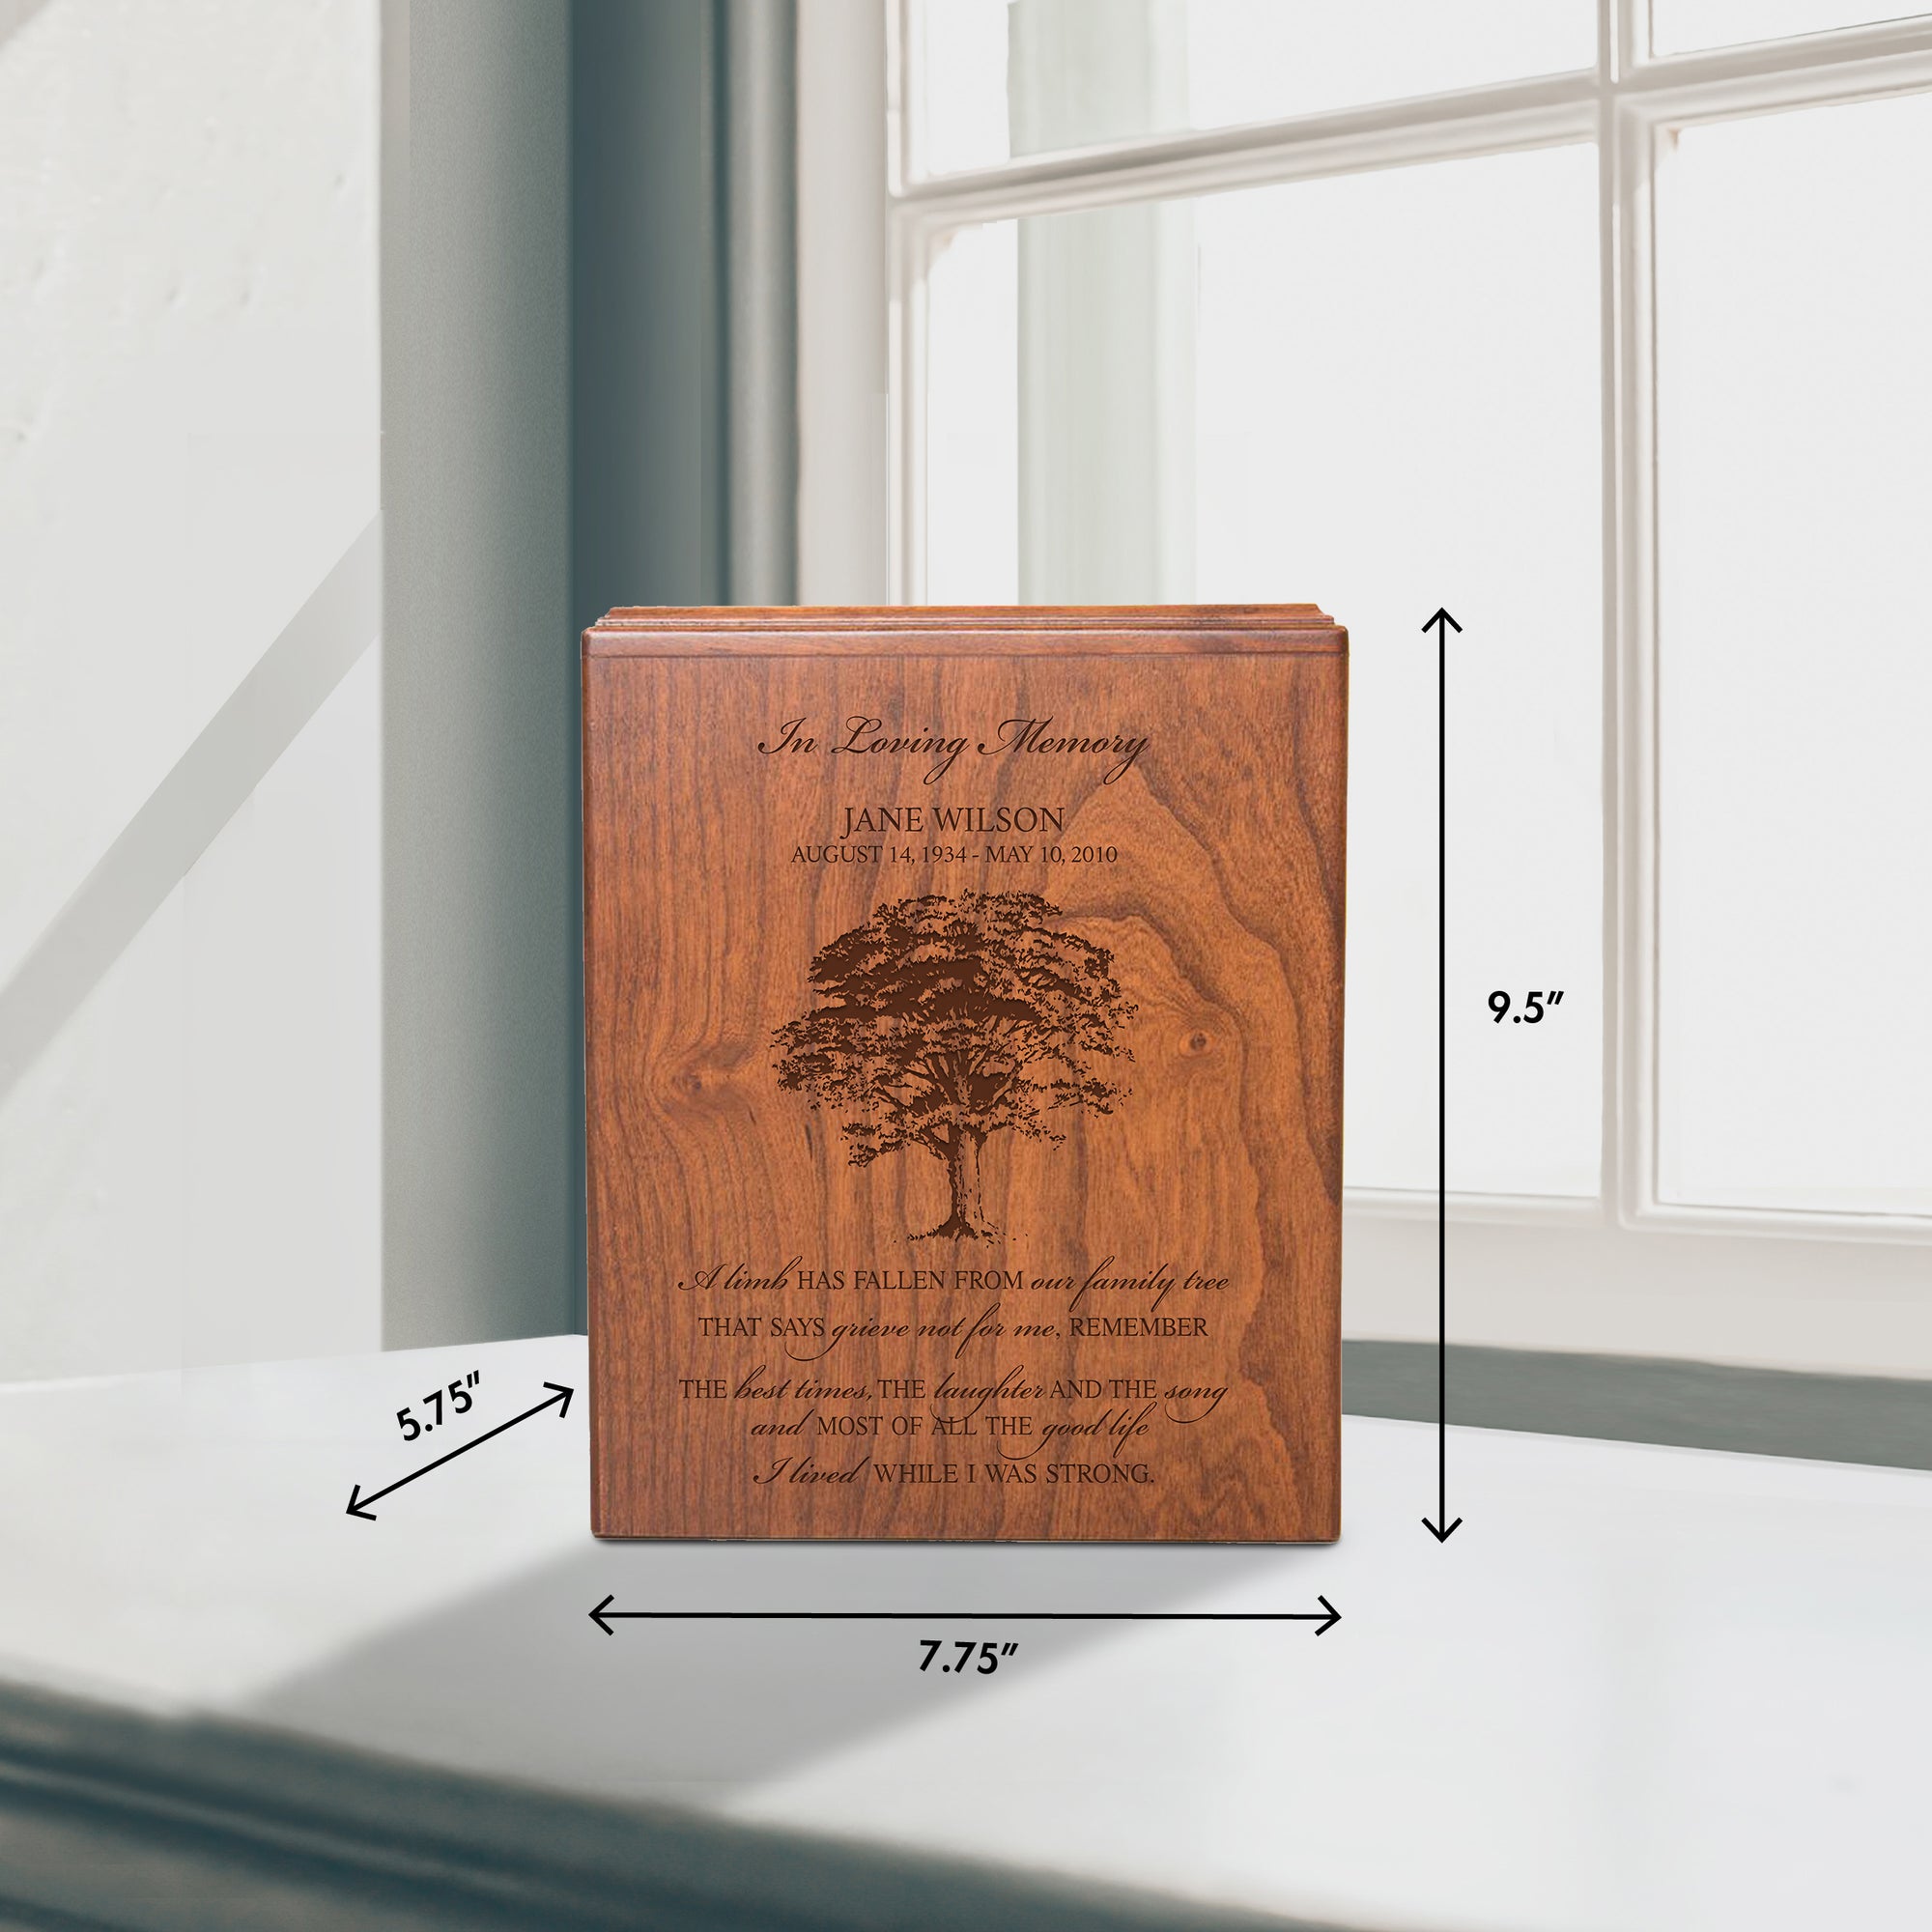 Custom Engraved Wooden Cremation Urn Box For Human Ashes-Human Adult Urn For Male and Female Ashes 